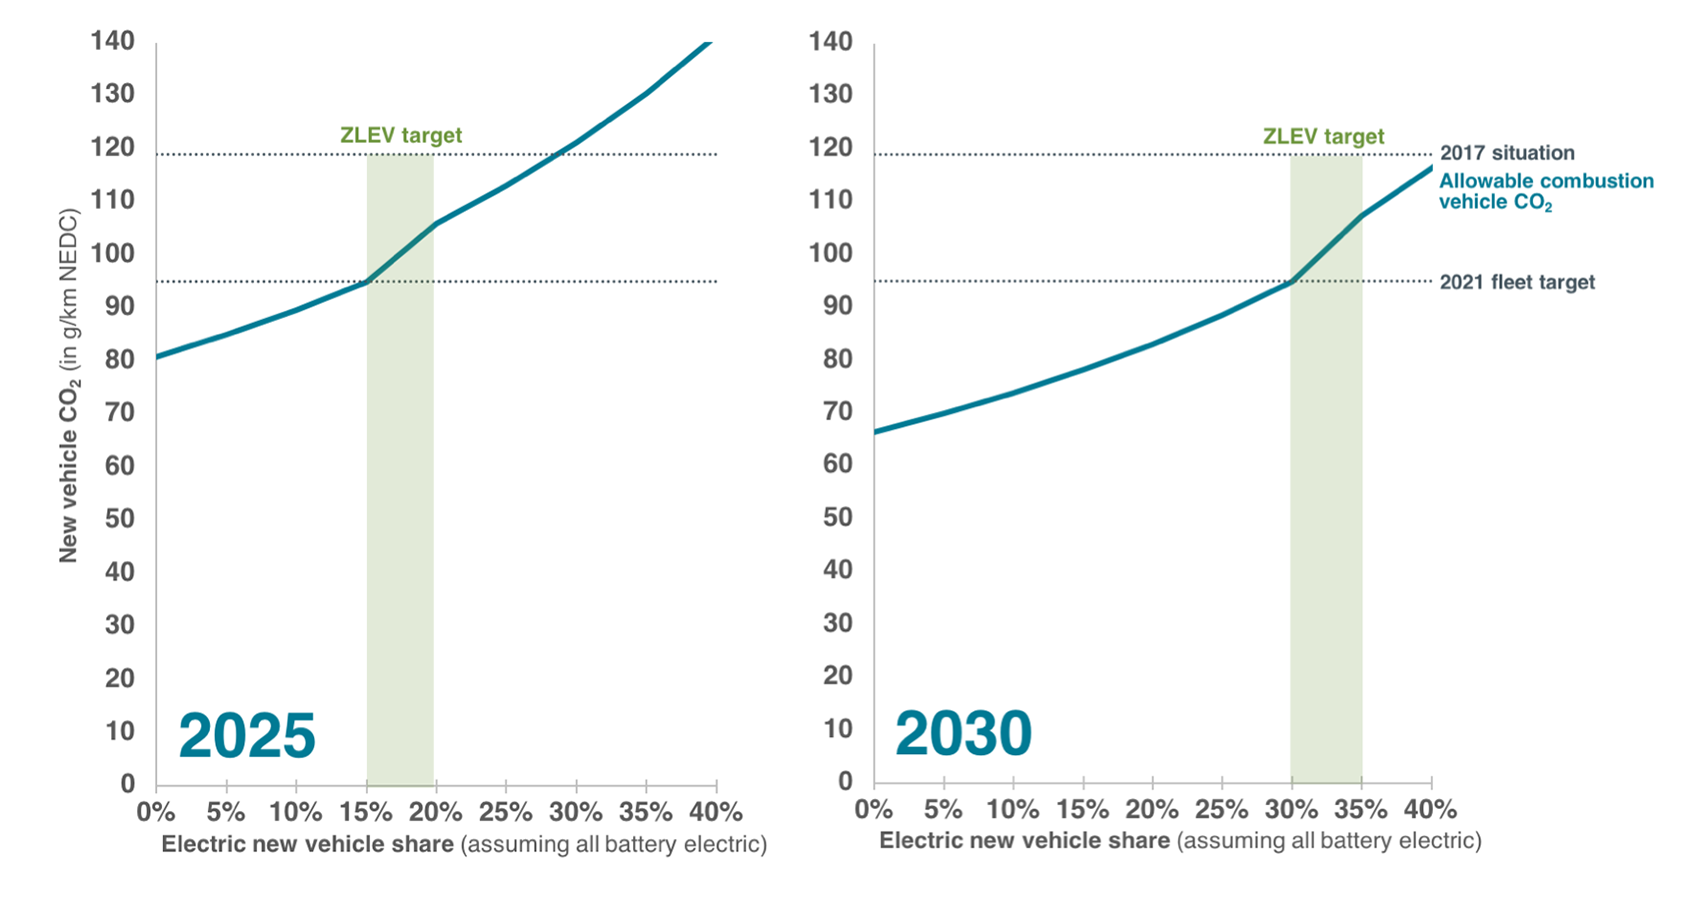 Electric vehicle shares 2025 and 2030